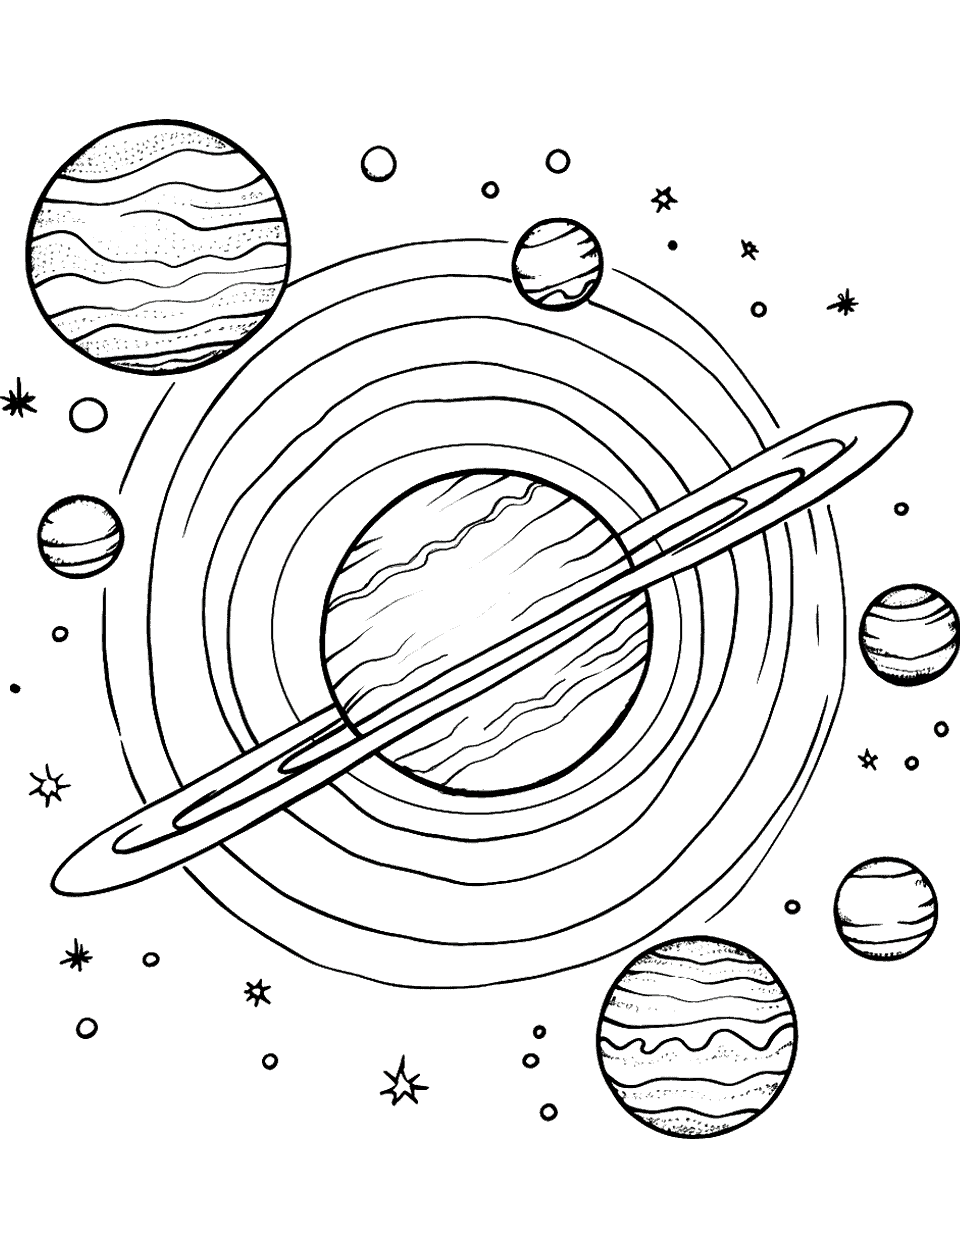 Jupiter's Many Moons Solar System Coloring Page - A depiction of some of Jupiter’s 79 moons in an array around the planet.